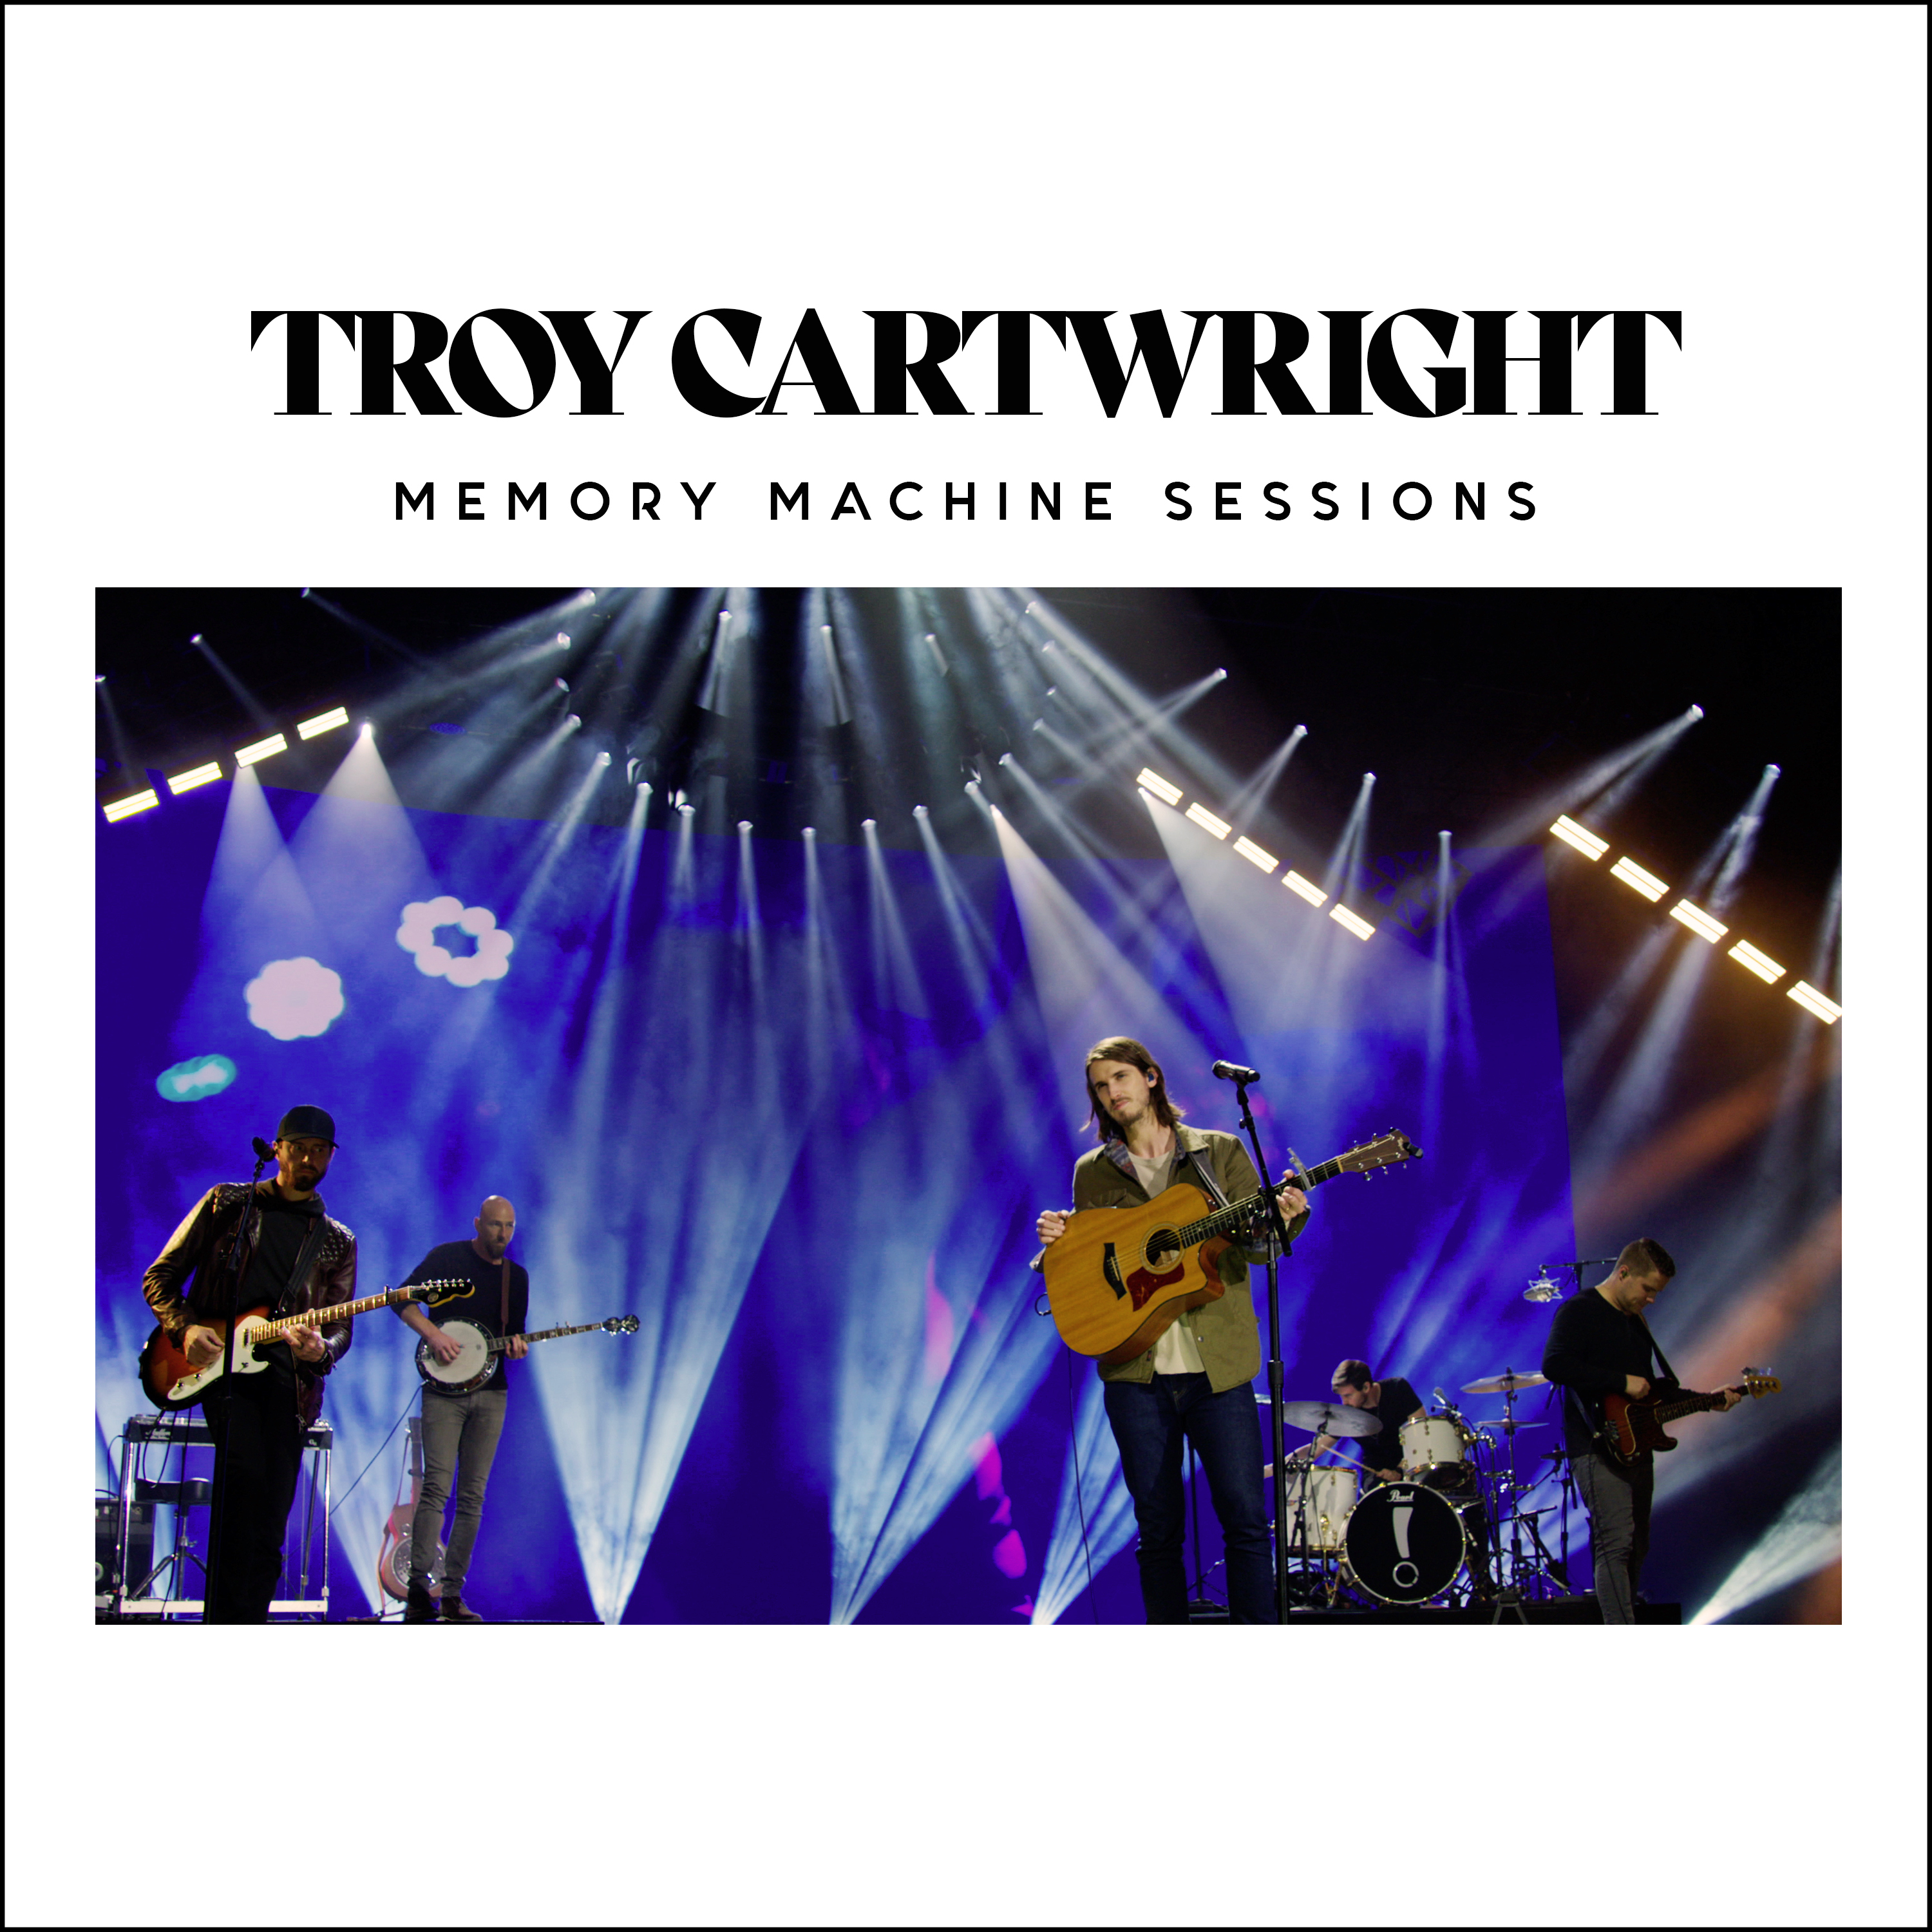 TROY CARTWRIGHT RELEASES LIVE EP MEMORY MACHINE SESSIONS